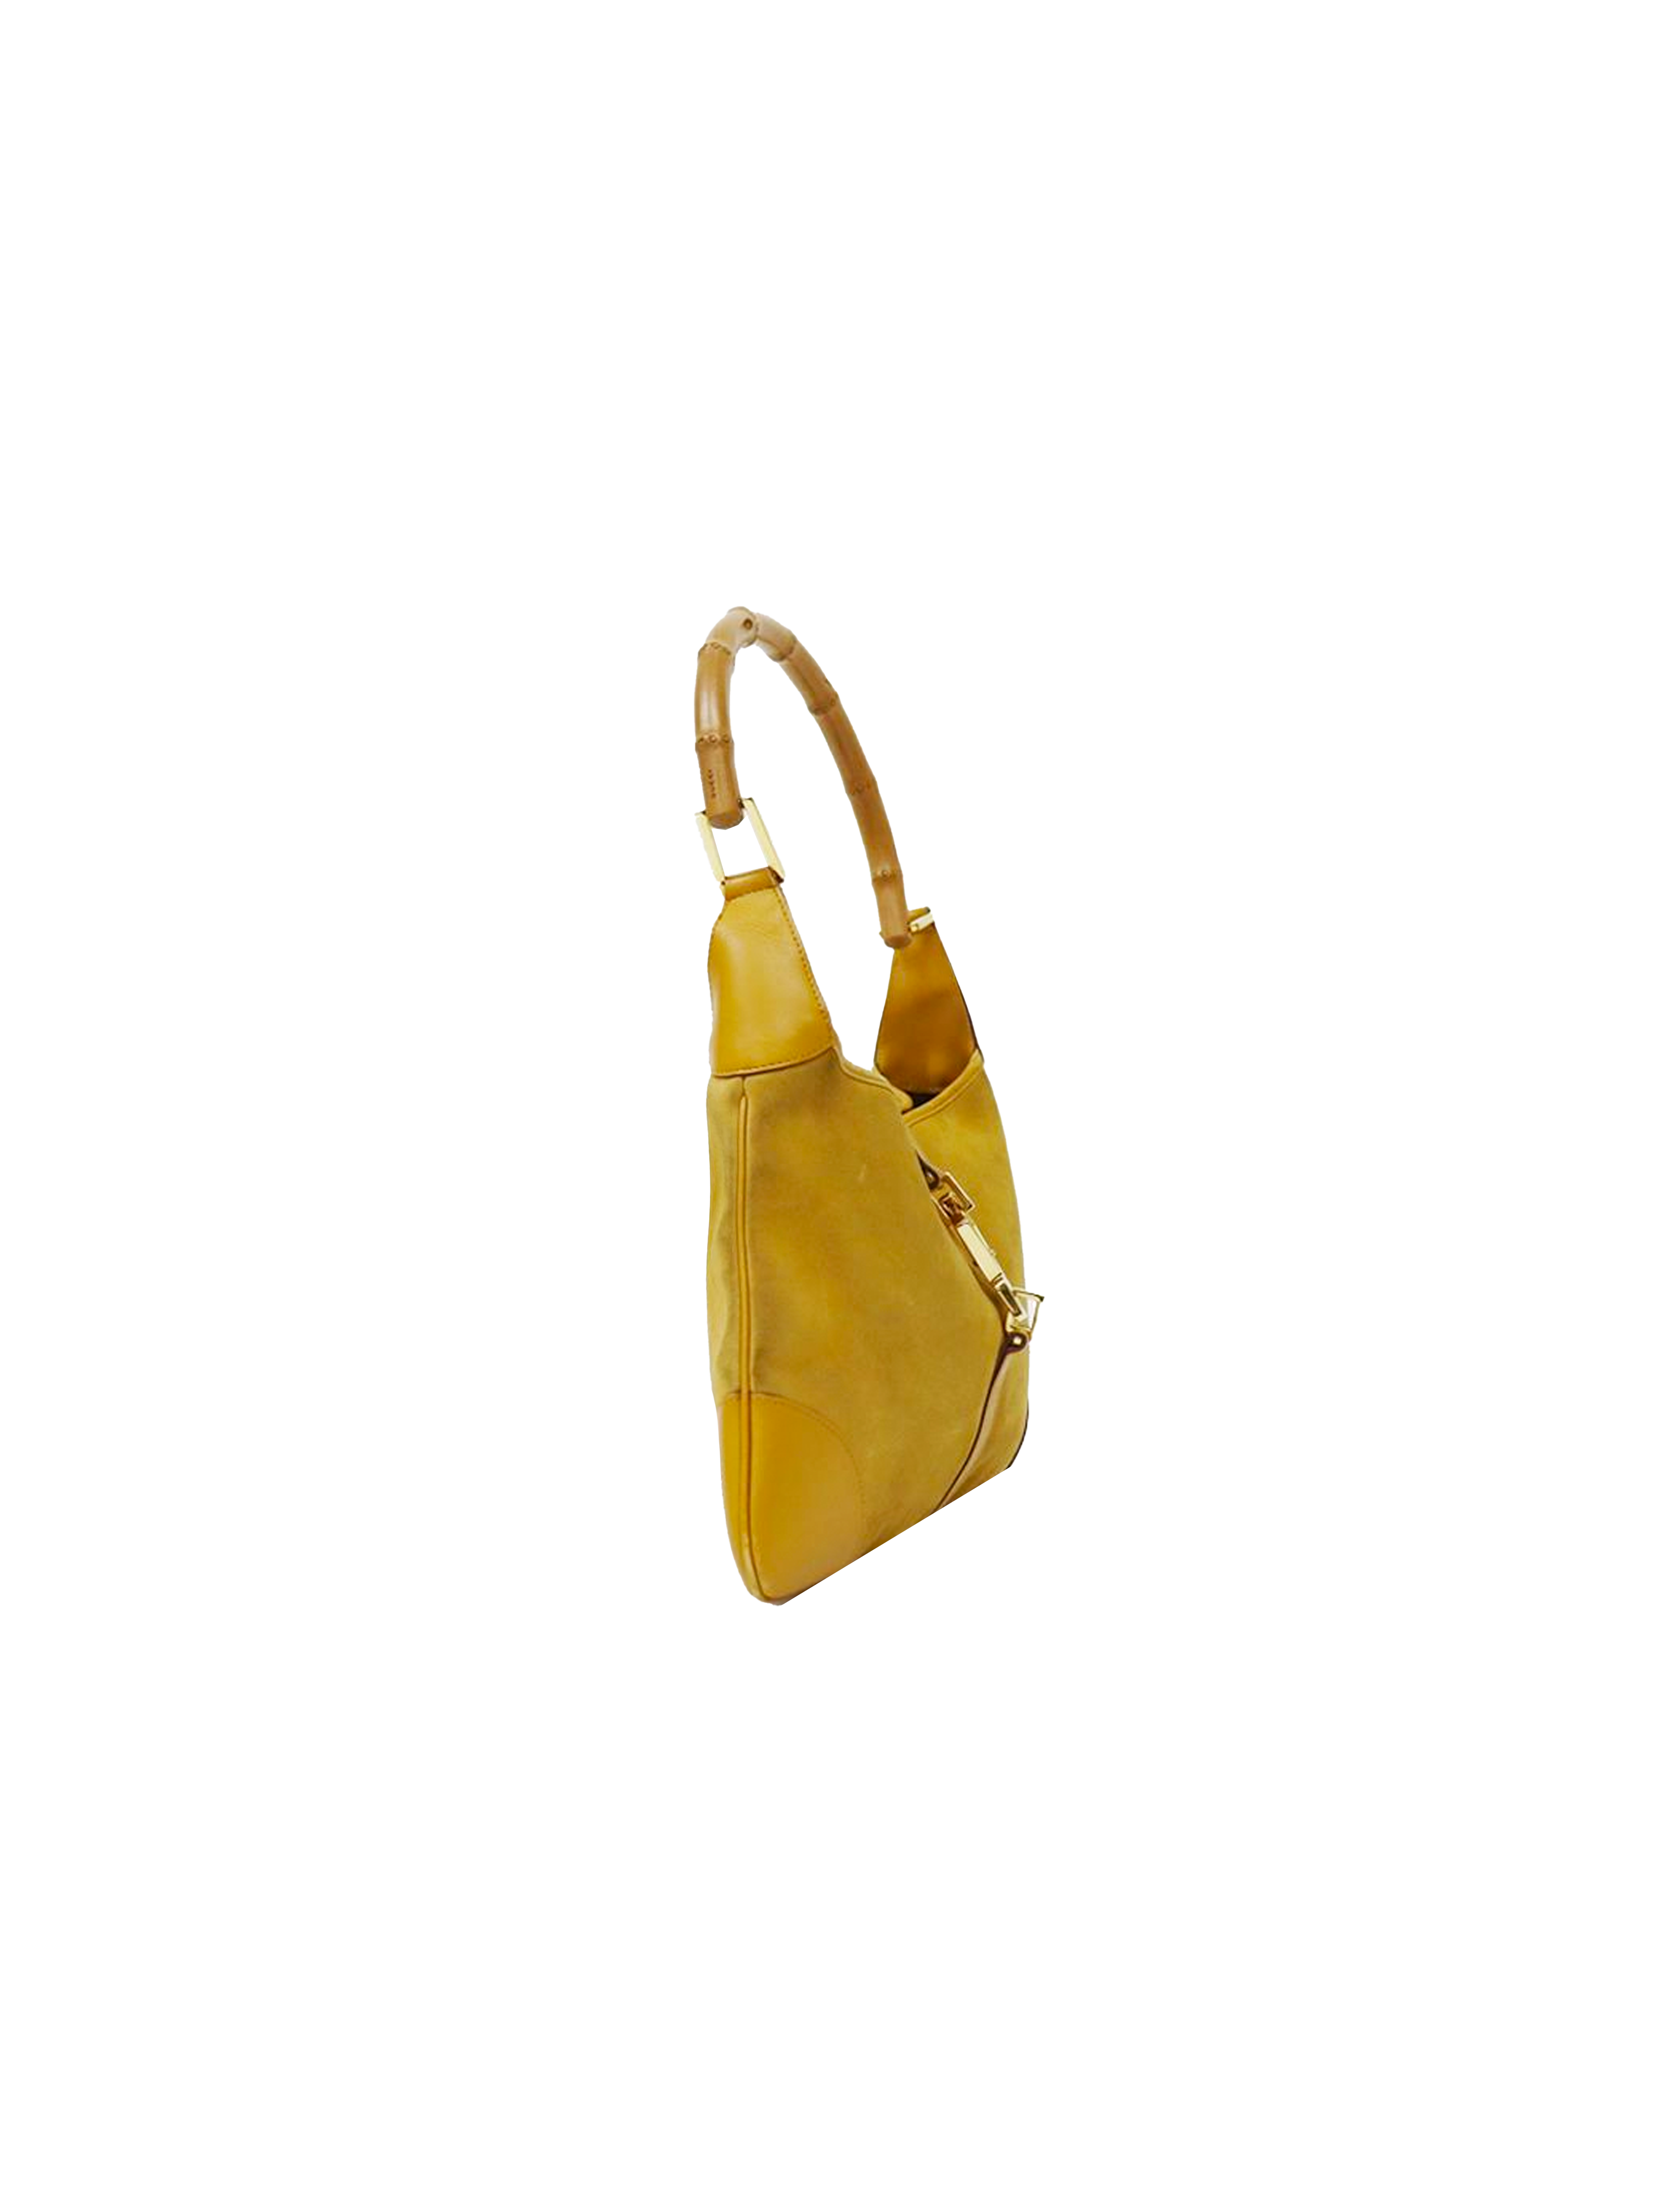 1990s Vintage GUCCI Yellow Suede Leather Bamboo Tote Gucci Diana